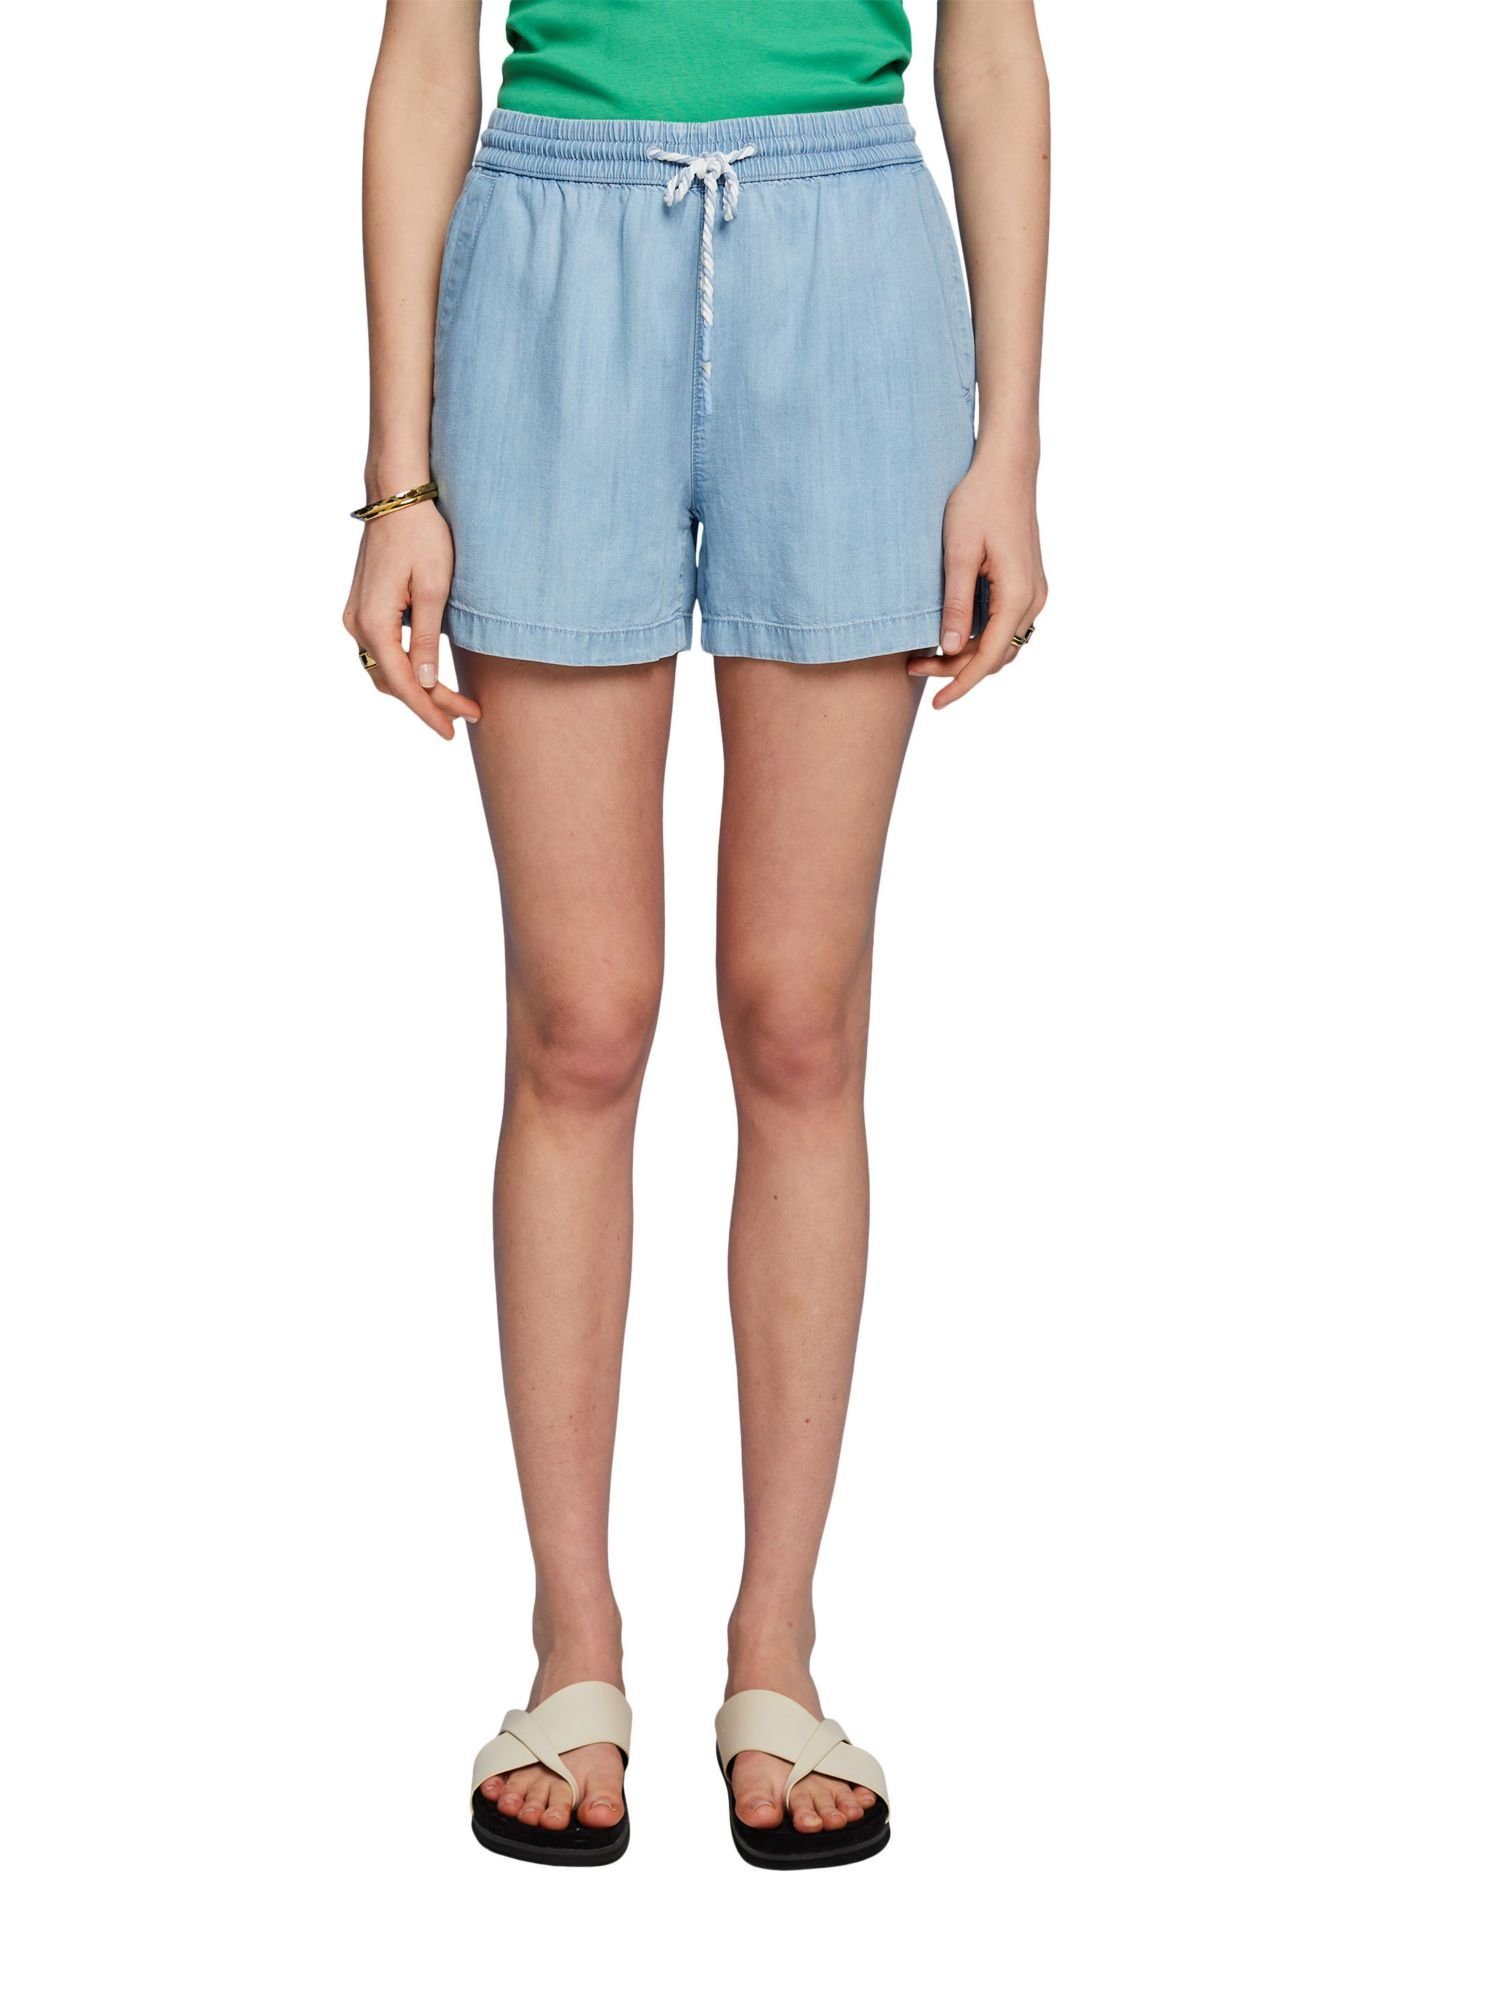 BLEACHED (1-tlg) TENCEL™ edc by Esprit Shorts Pull-on-Jeansshorts, BLUE